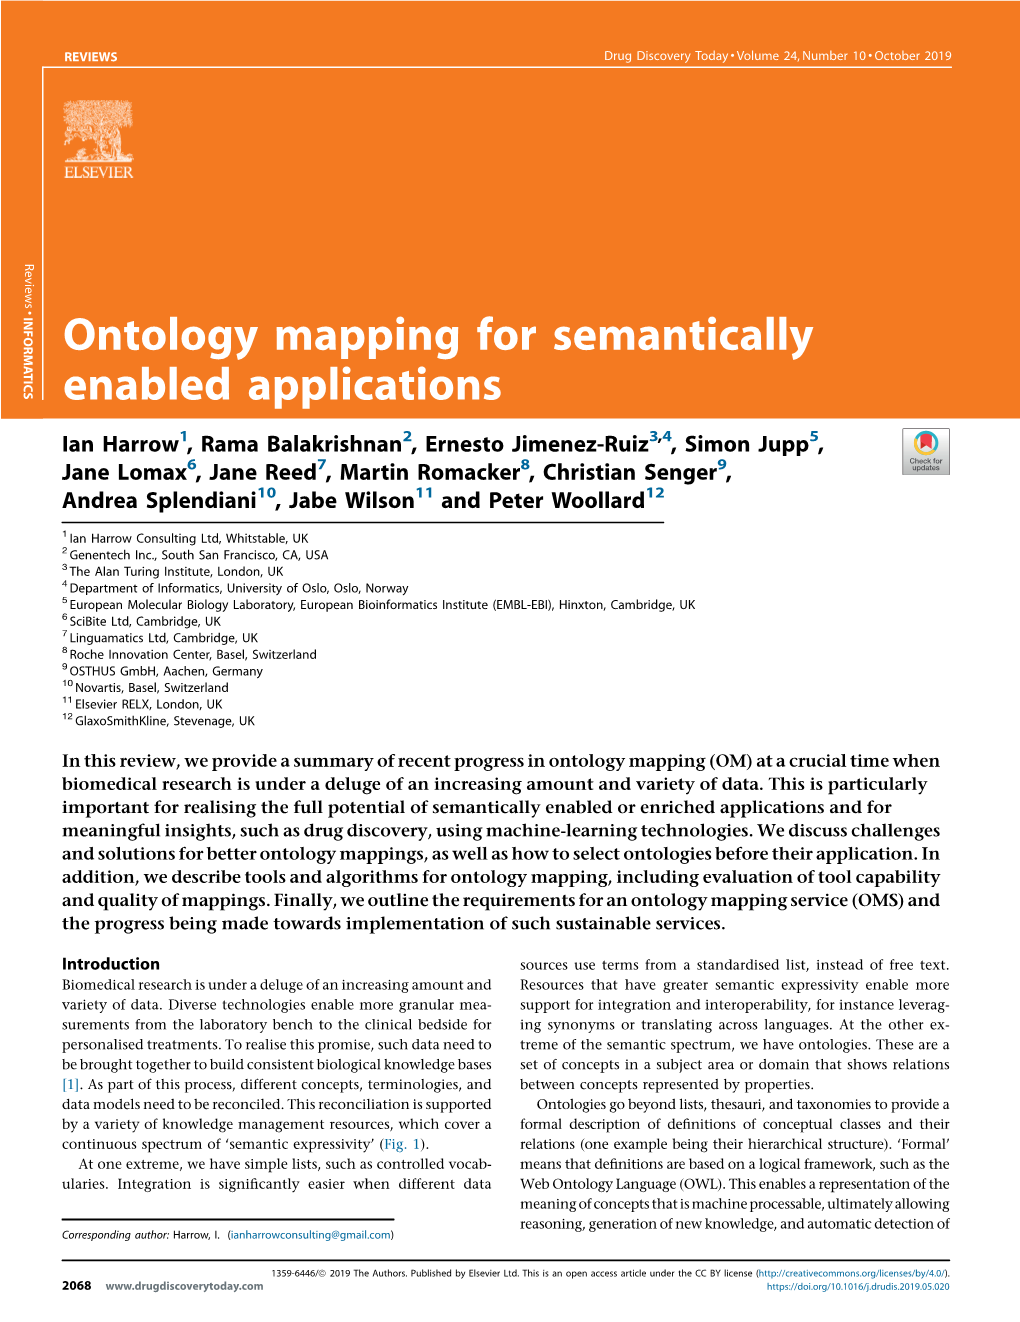 Ontology Mapping for Semantically Enabled Applications